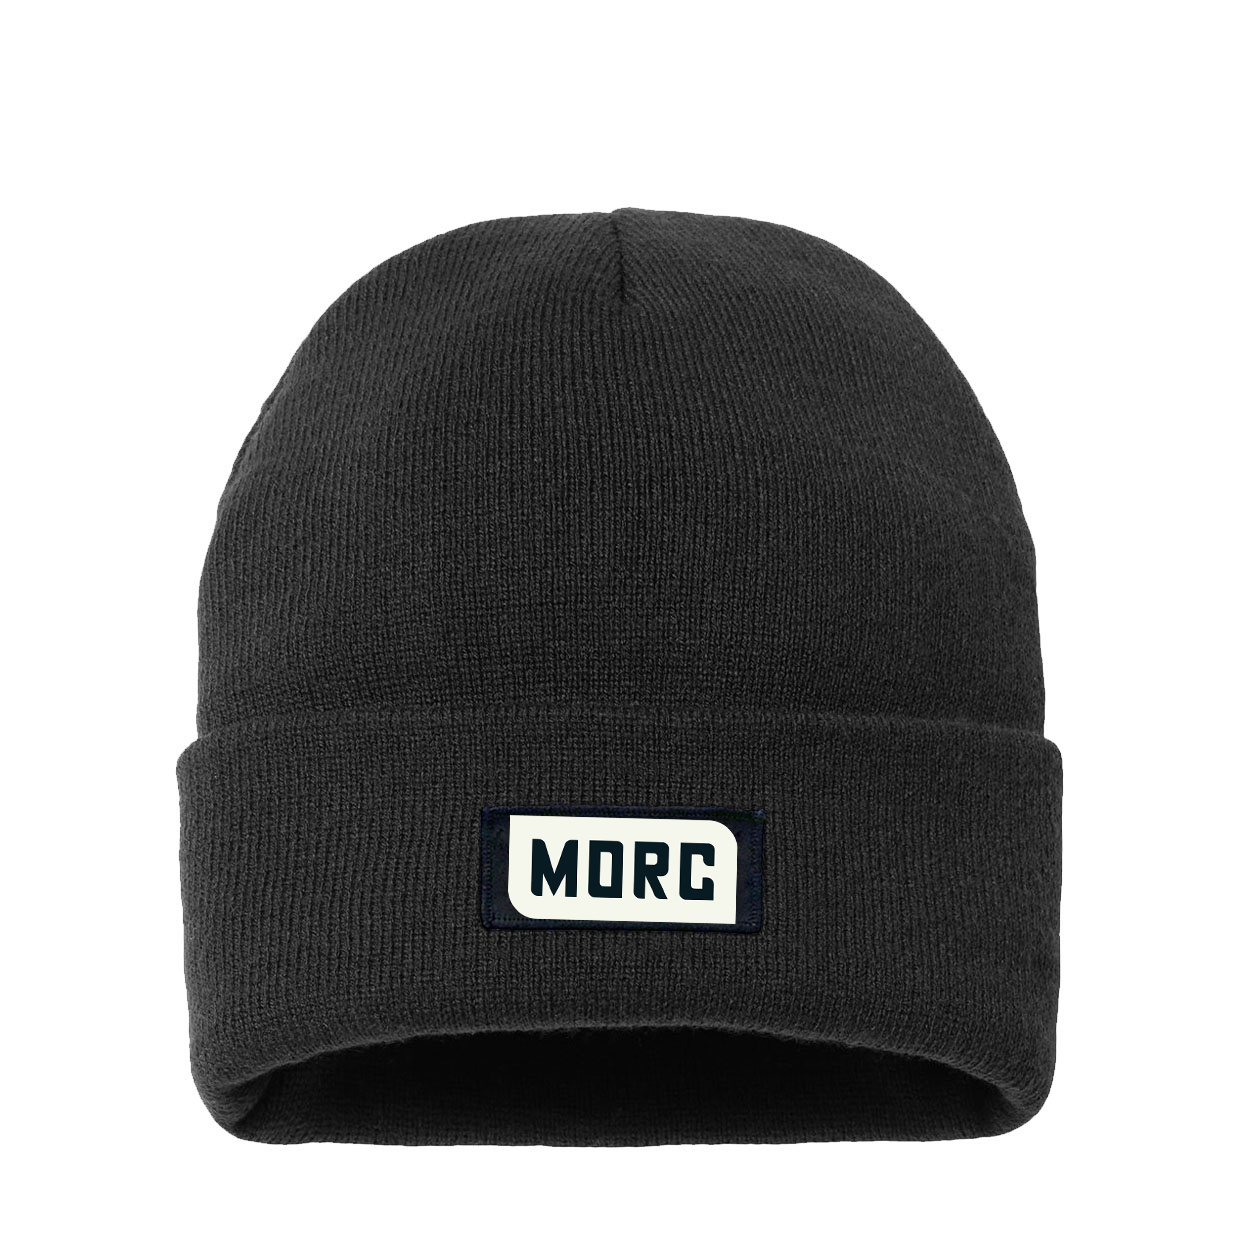 MORC Night Out Woven Patch Night Out Sherpa Lined Cuffed Beanie Black